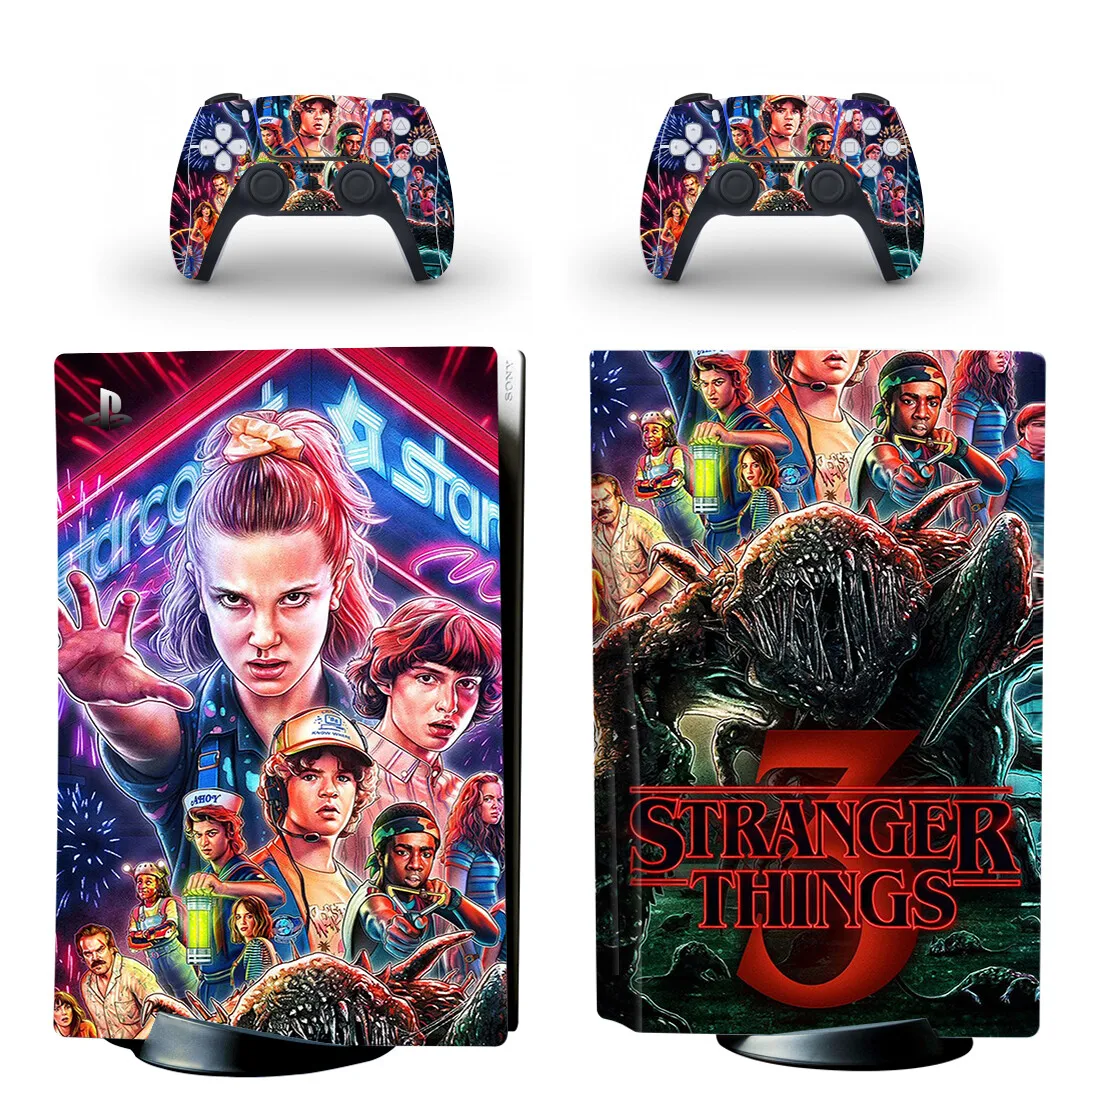 Stranger Things PS5 Standard Disc Skin Sticker Decal Cover for PlayStation 5 Console and 2 Controllers PS5 Disk Skin Vinyl